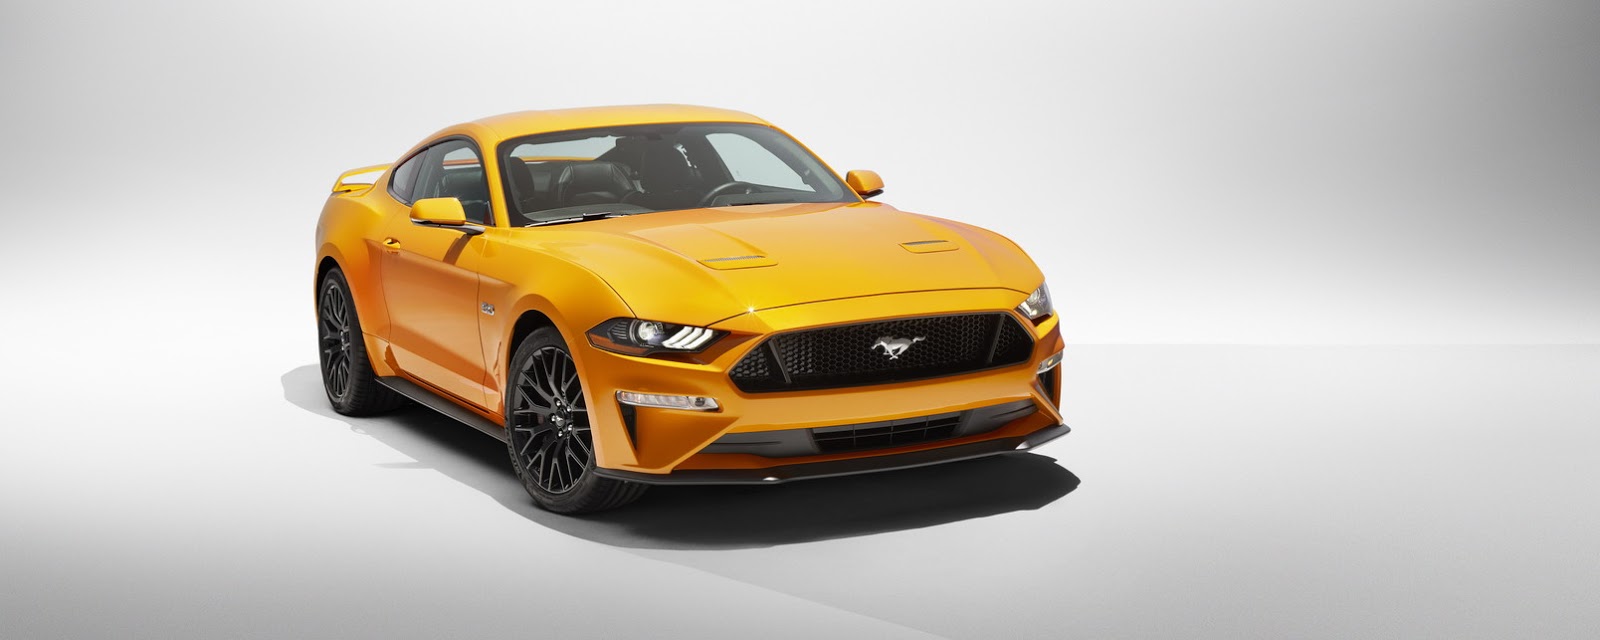 2018-Ford-Mustang-Brochure-5